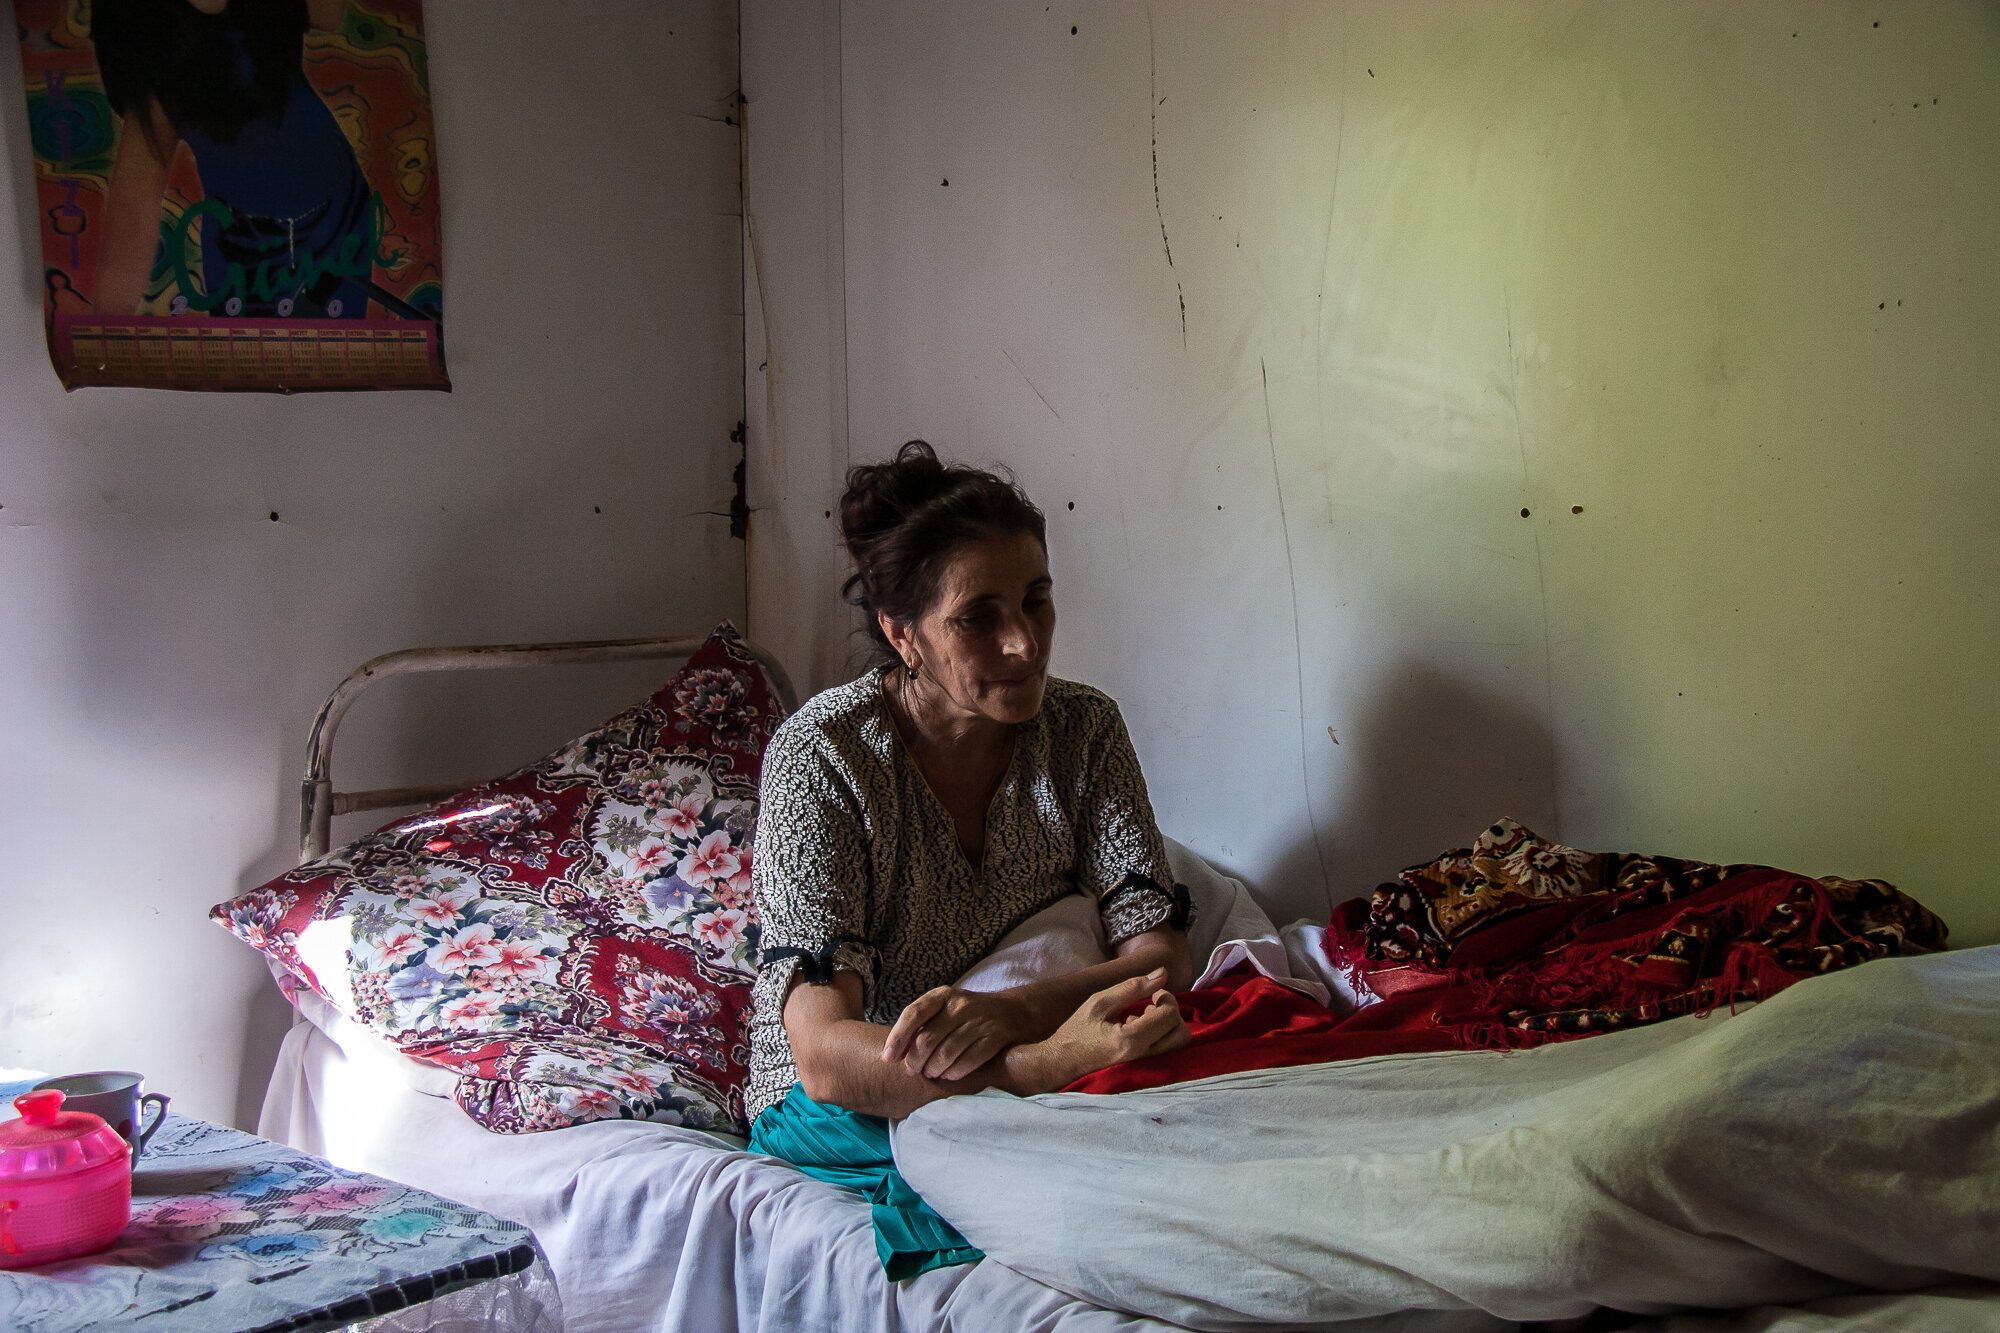  A woman in temporary housing in a camp for people displaced from Nagorno-Karabakh. Agdam region, Azerbaijan. 2006. 